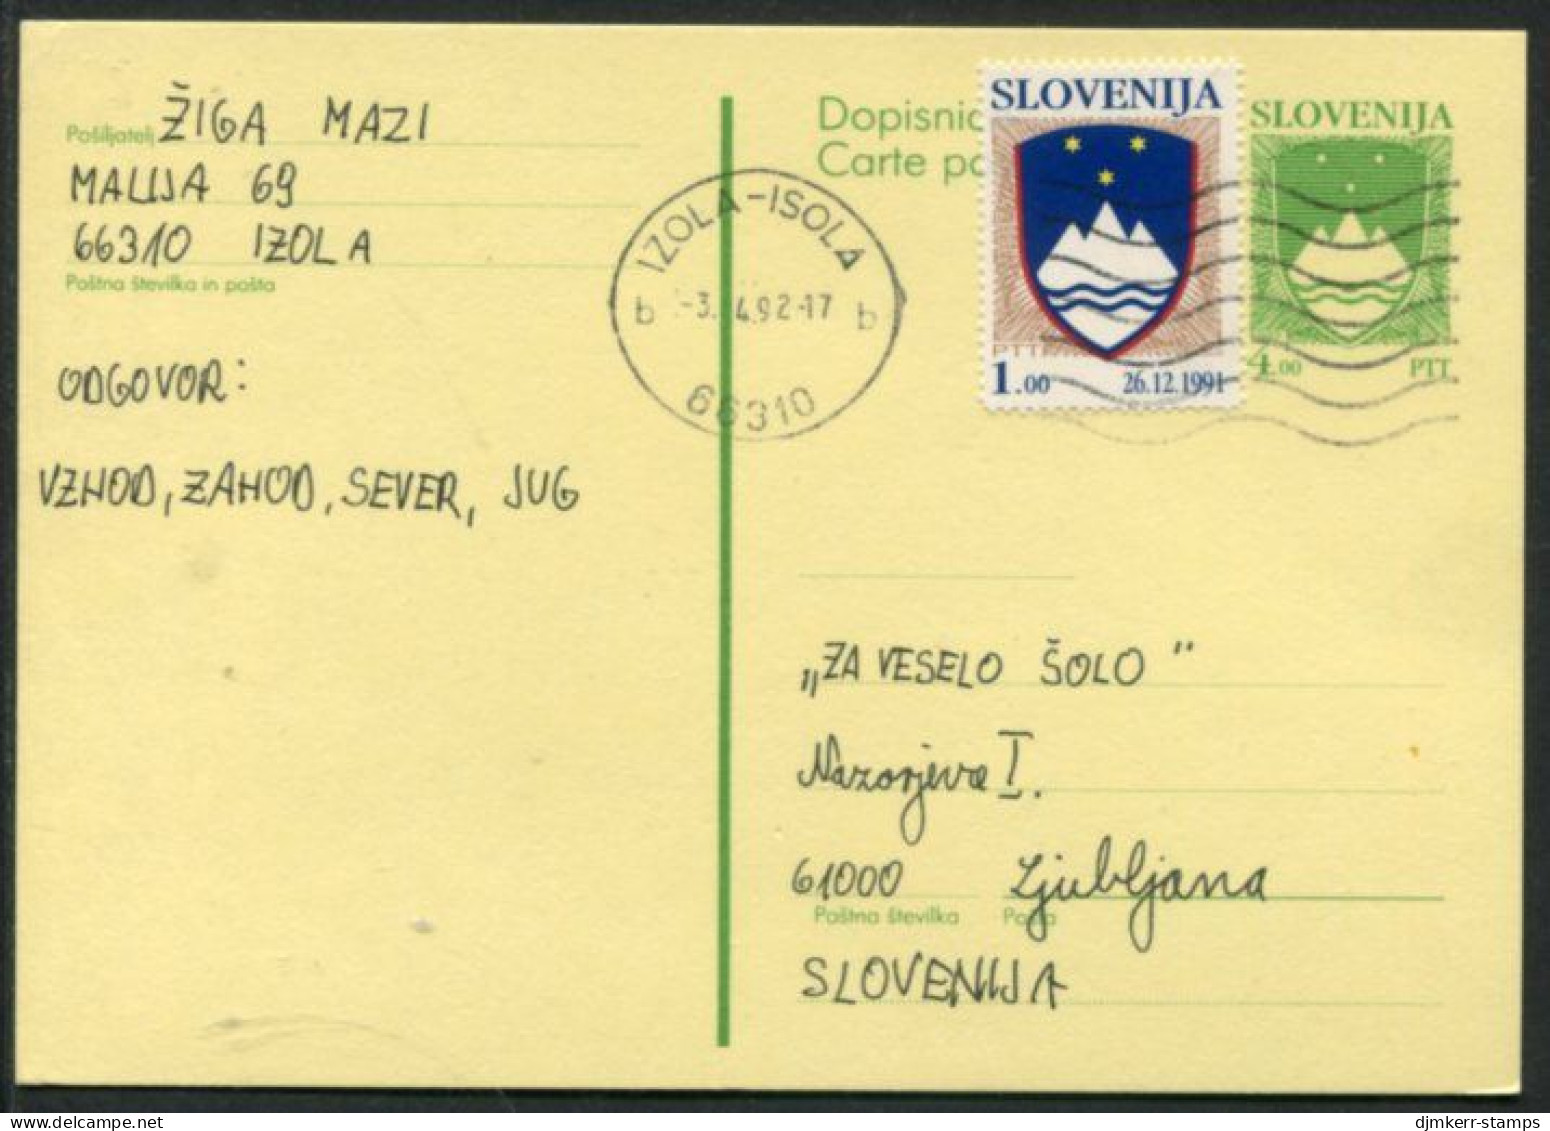 SLOVENIA 1992 4.00 T.  Arms  Stationery Card, Used With Additional 1 T. Stamp.  Michel P1 - Slovenia